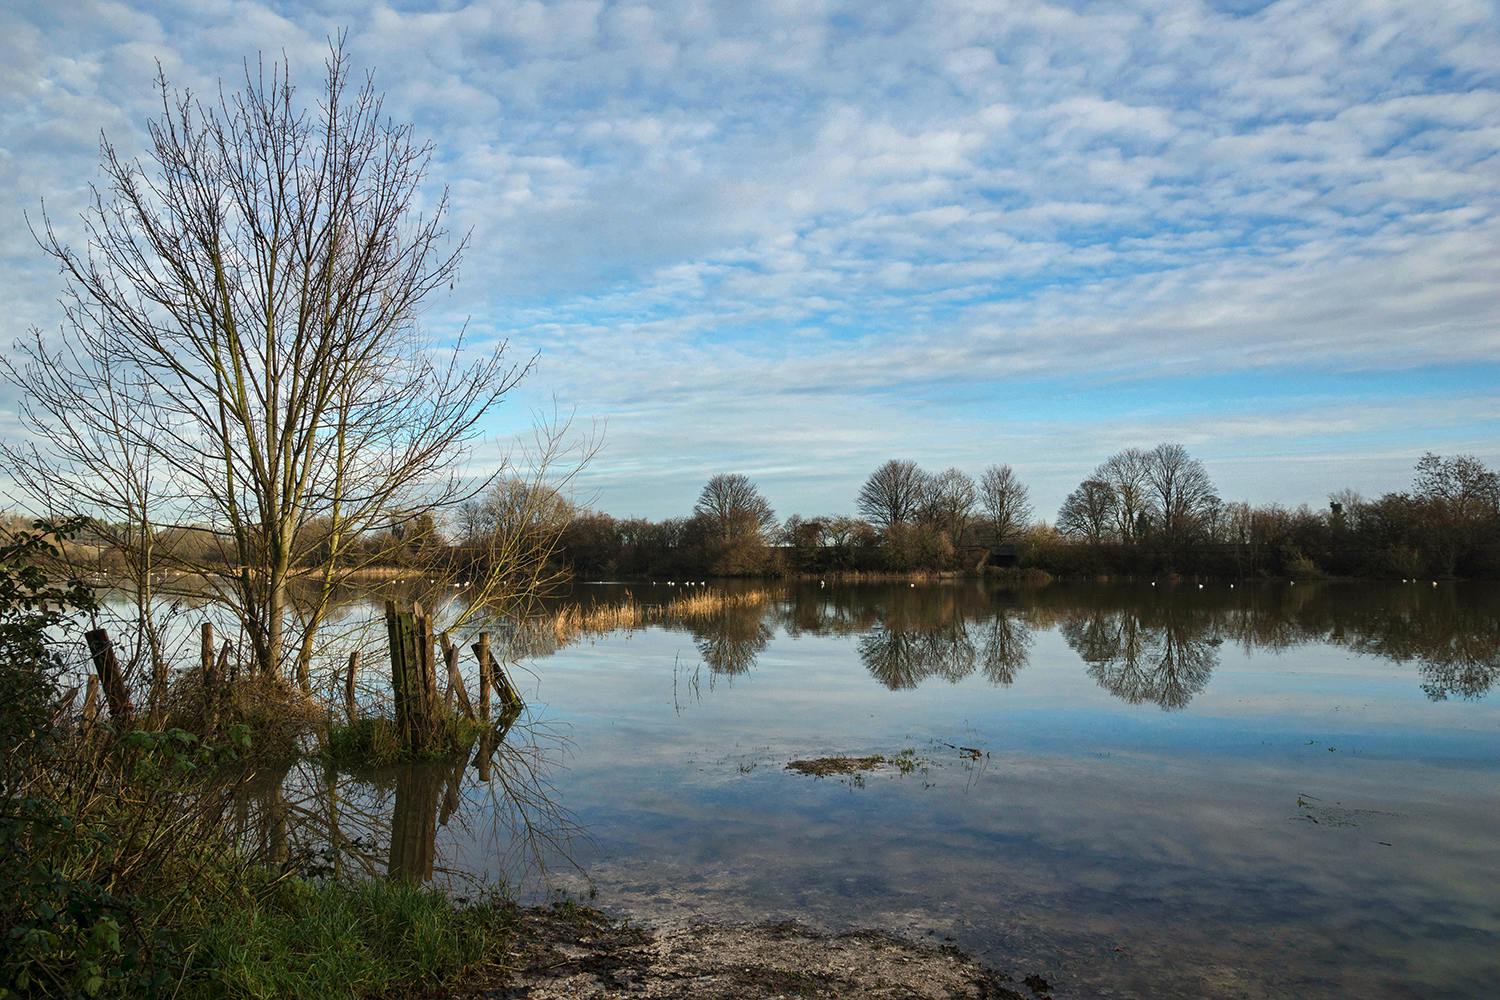 A photograph of a field flooded by the rising River Ouse near Lewes